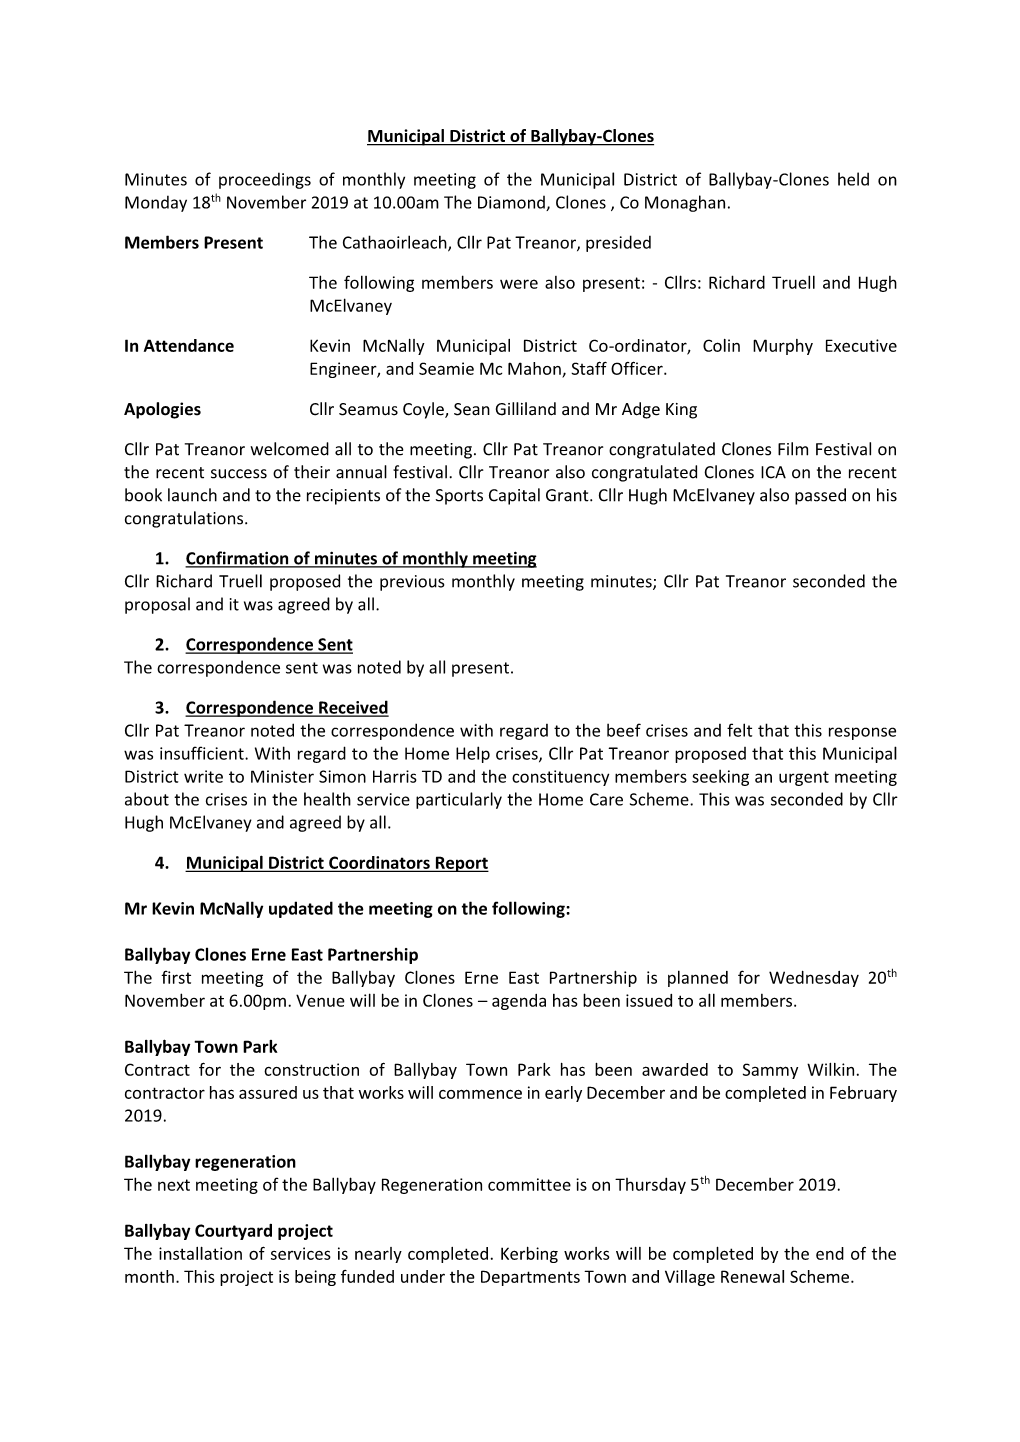 Municipal District of Ballybay-Clones Minutes of Proceedings of Monthly Meeting of the Municipal District of Ballybay-Clones